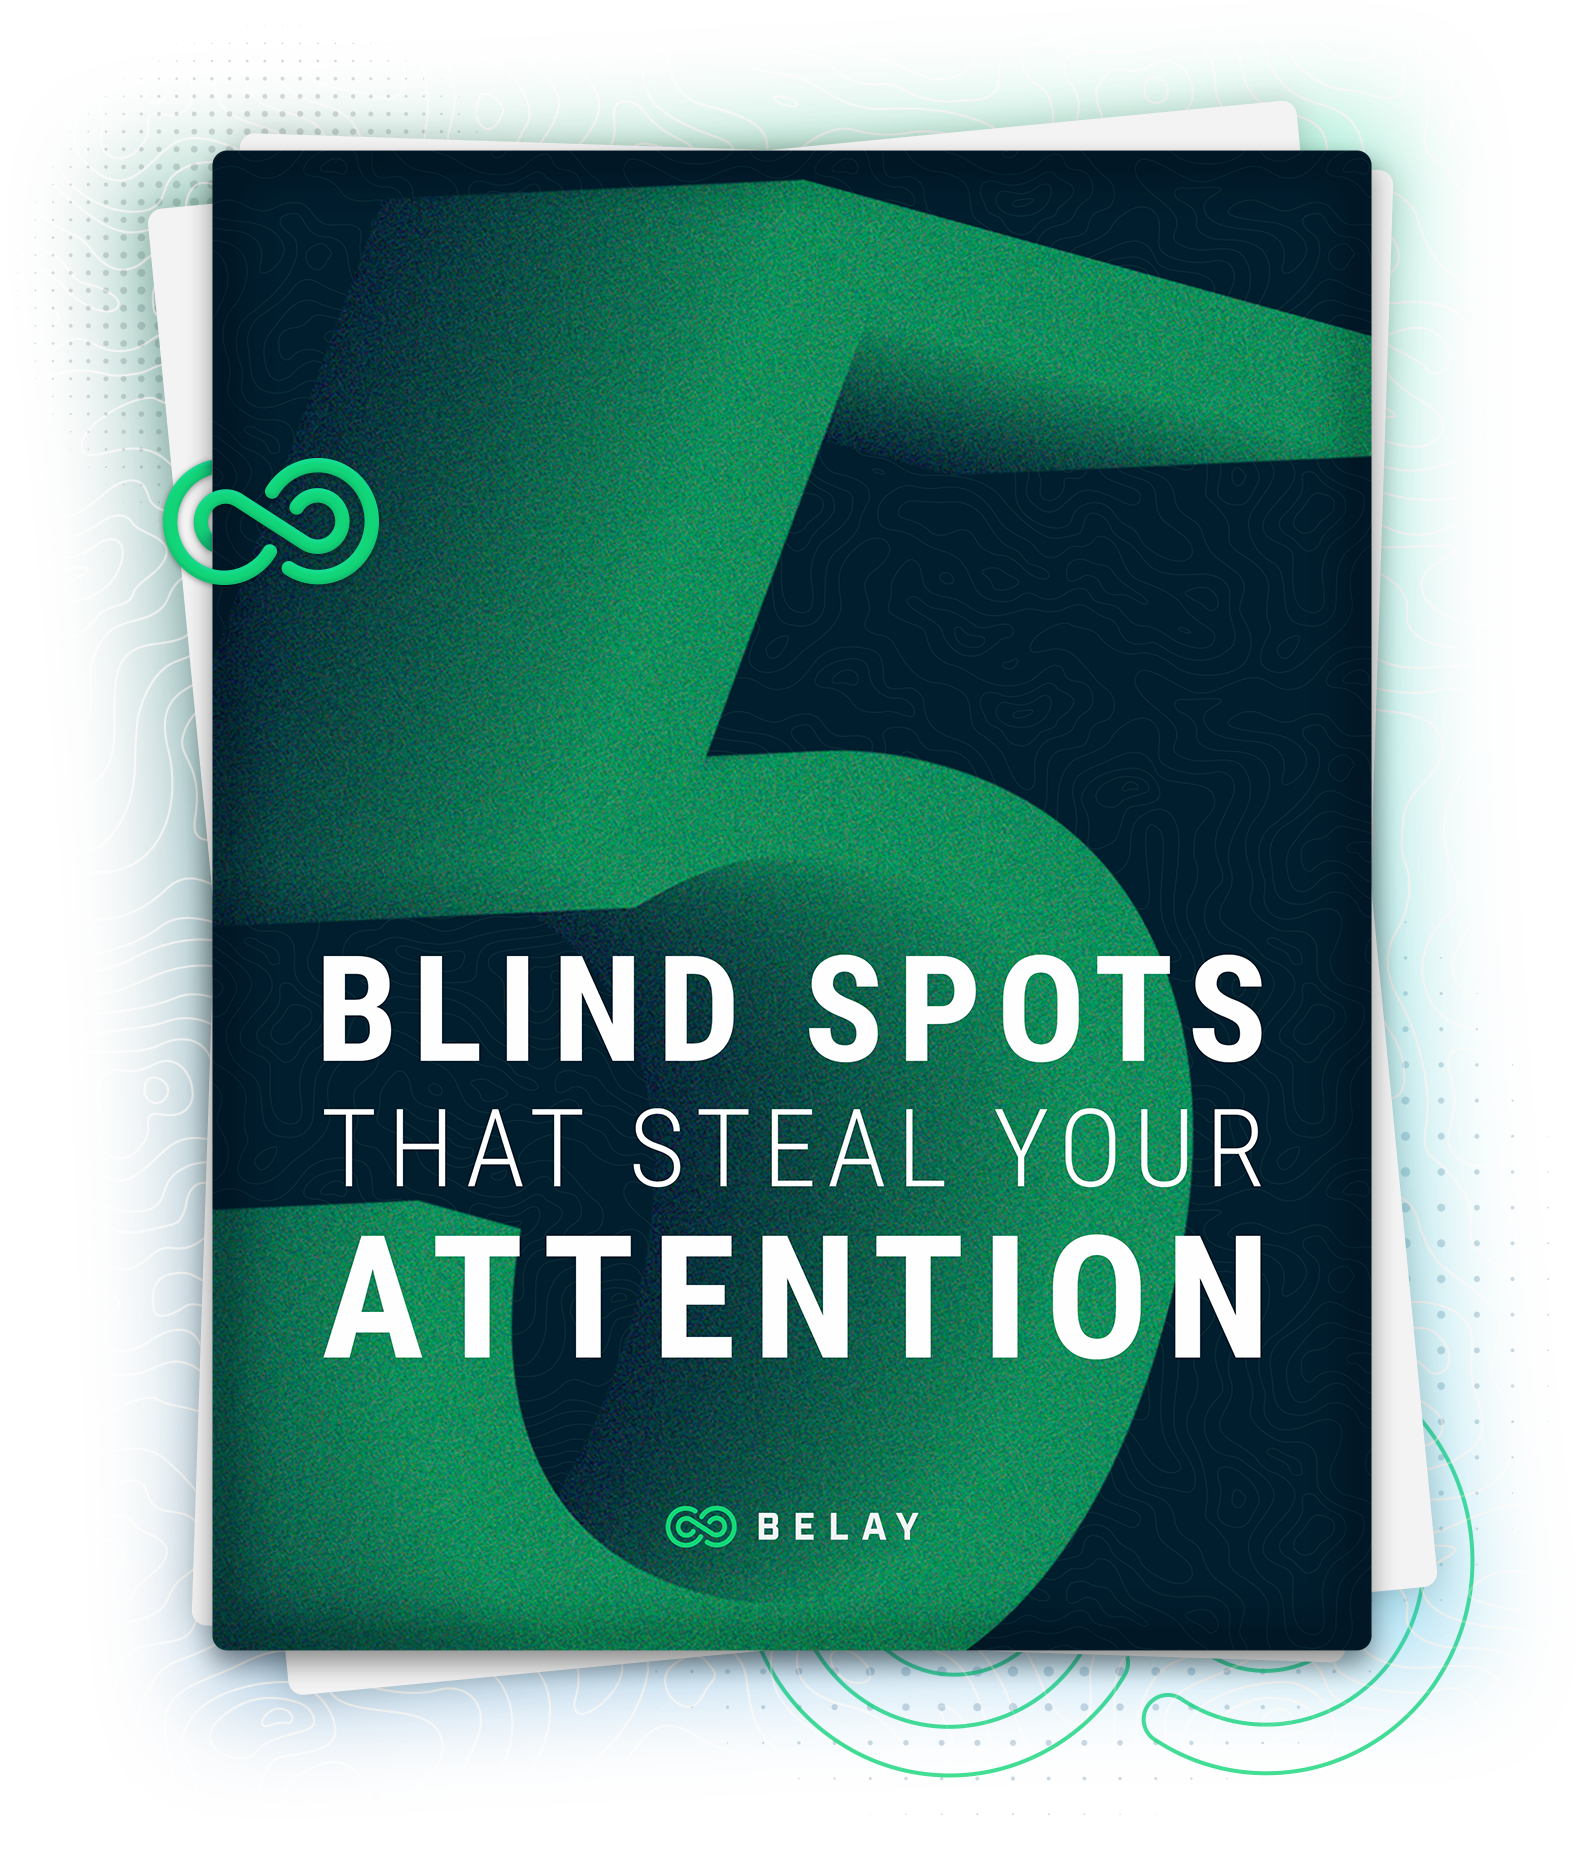 5 Blind Spots That Steal Your Attention